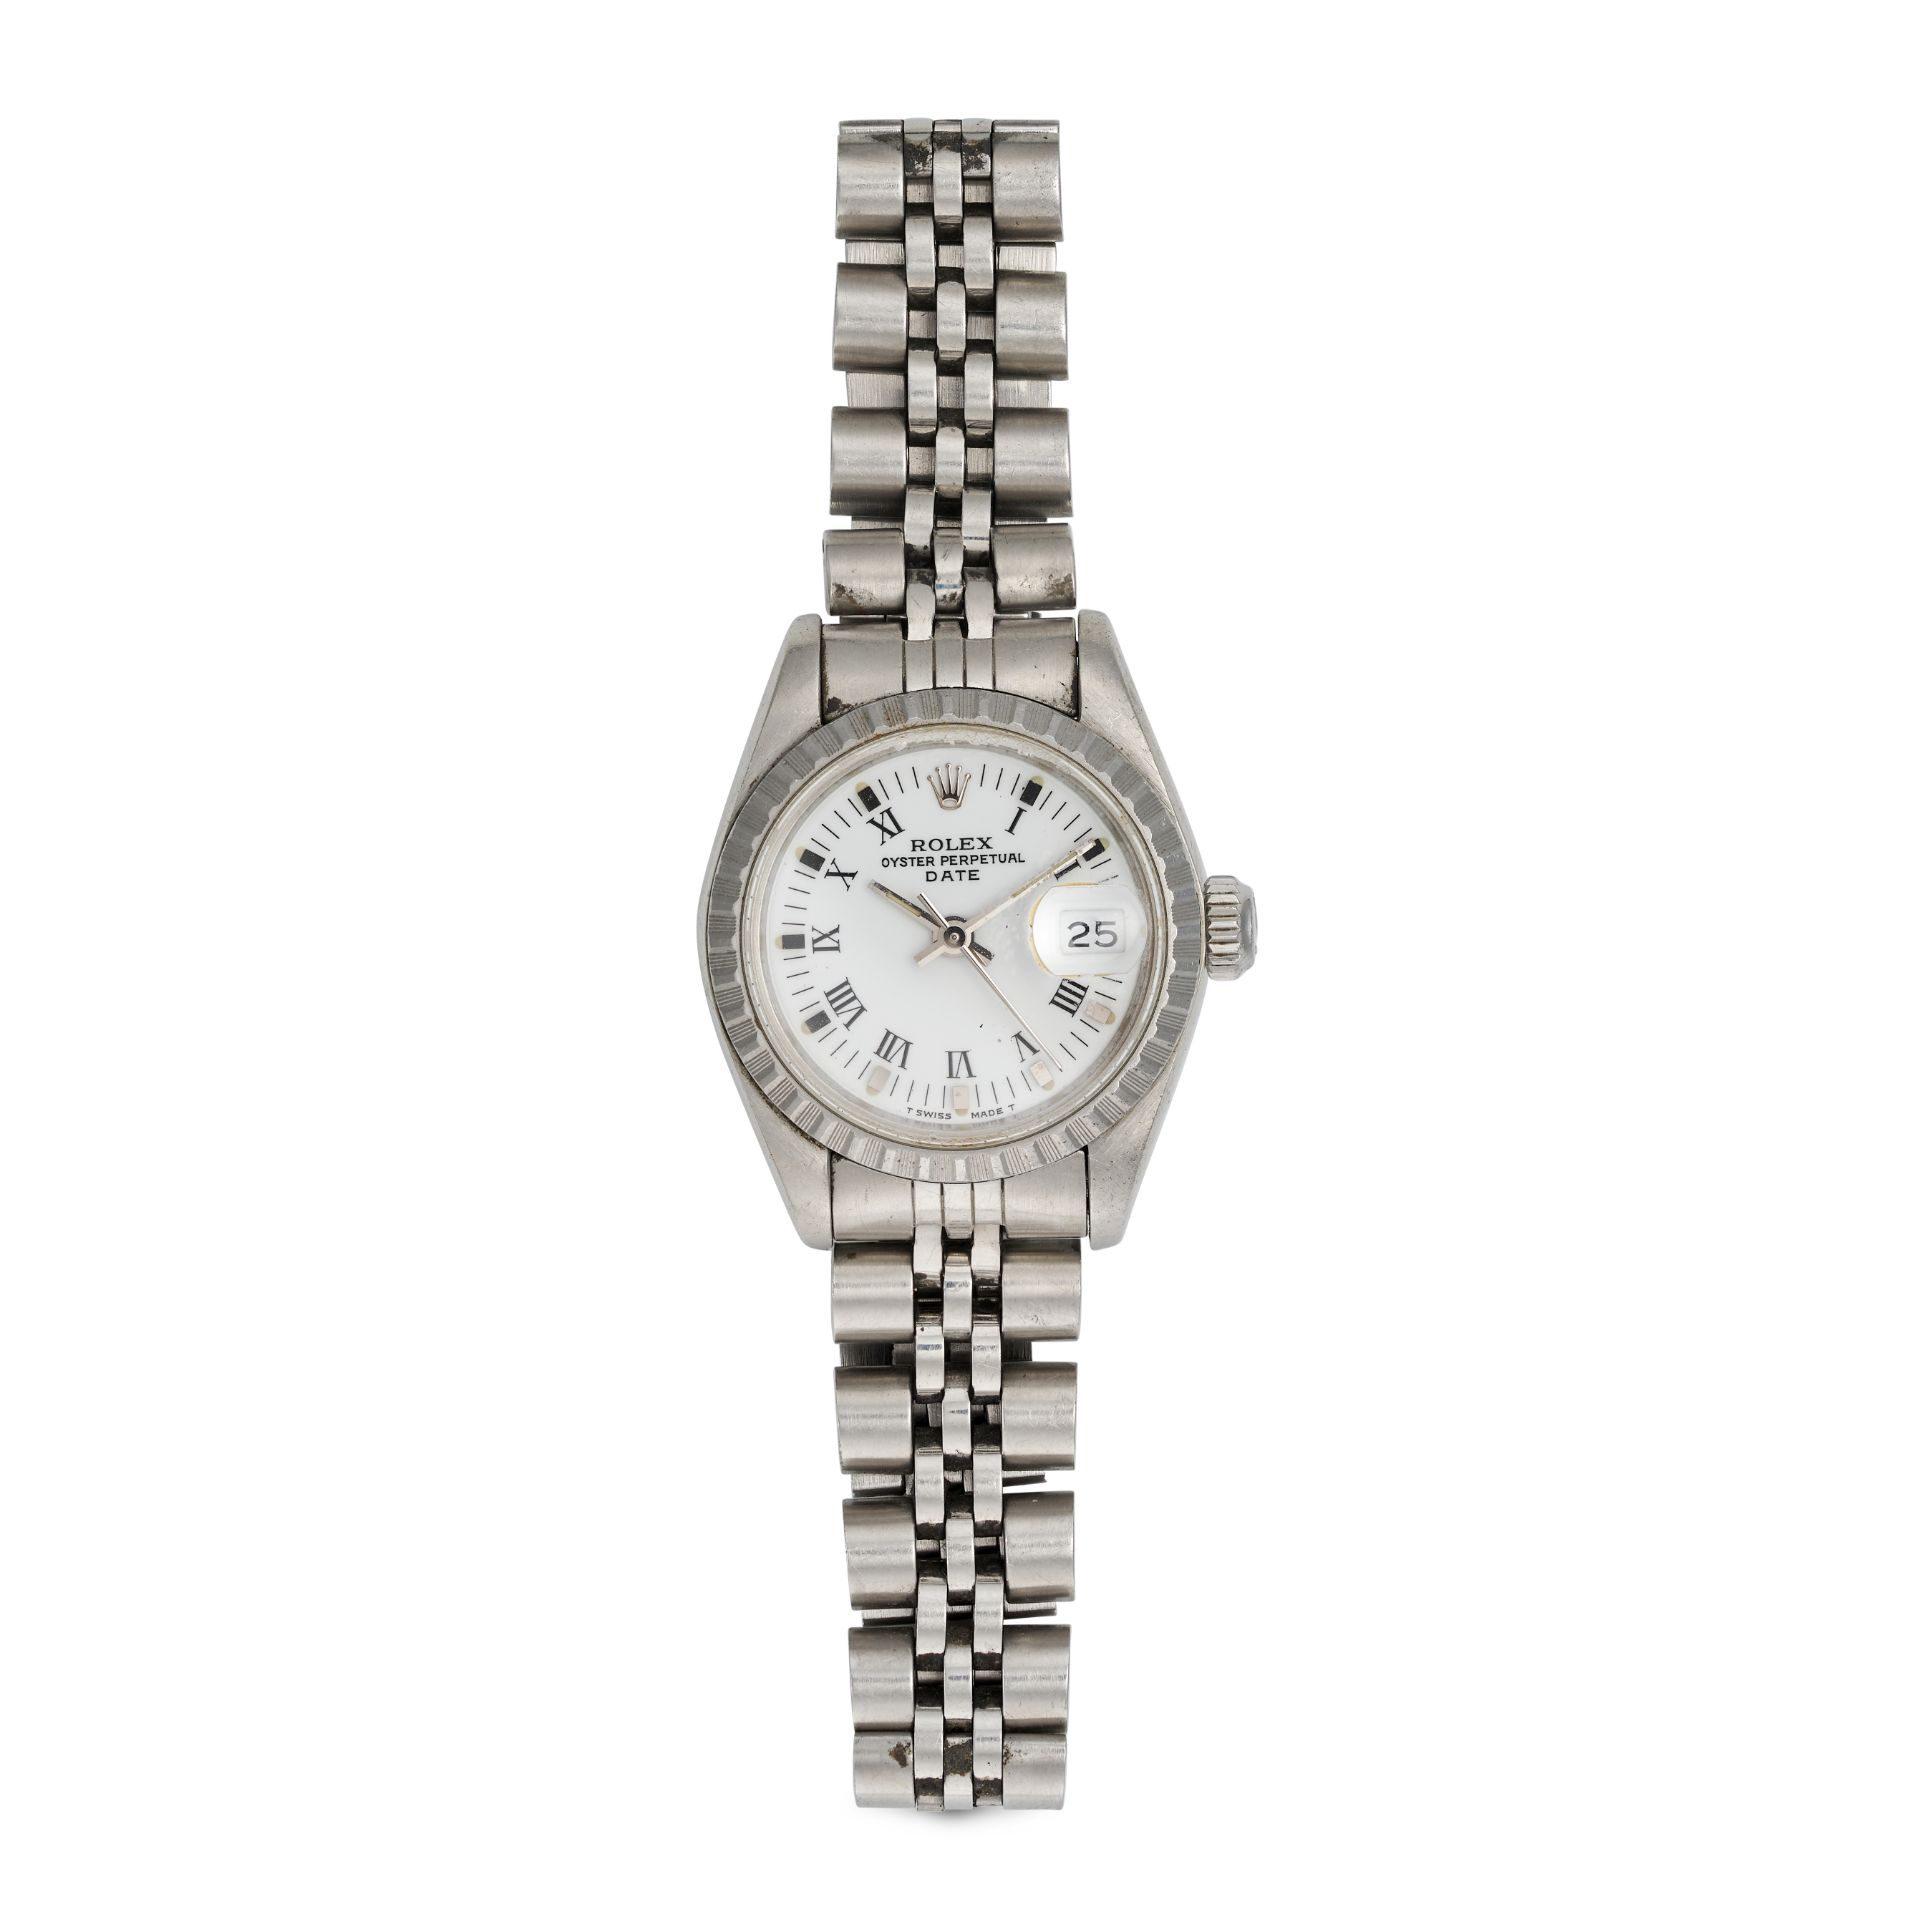 ROLEX - A LADIES ROLEX OYSTER PERPETUAL DATE WRISTWATCH in stainless steel, 69240, serial R77XXXX...